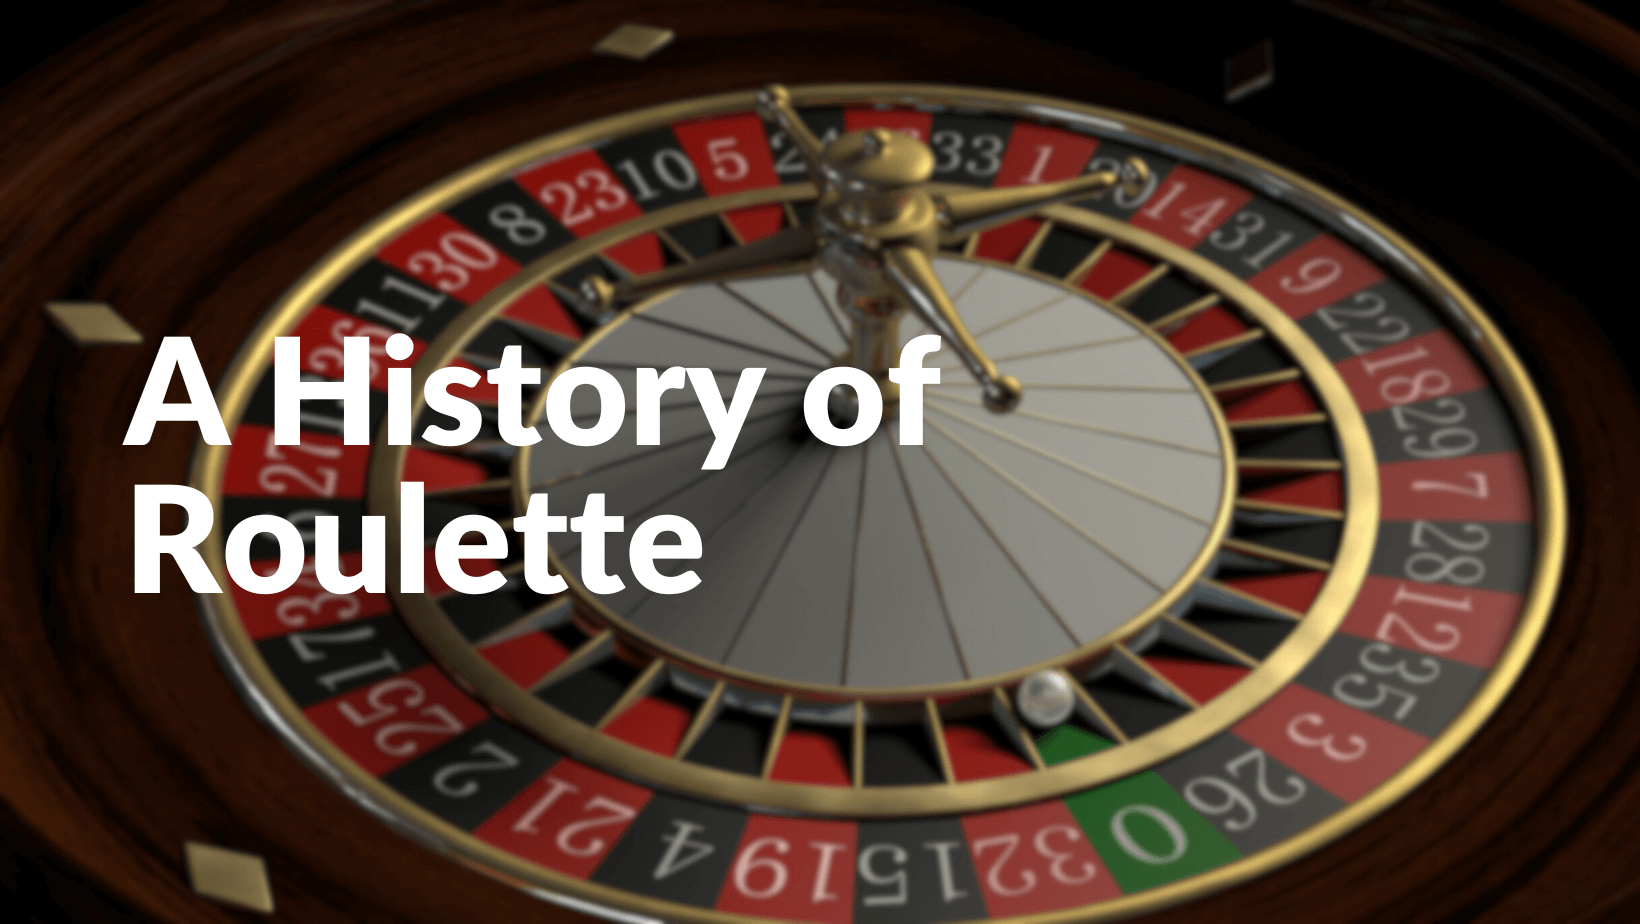 A History of Roulette